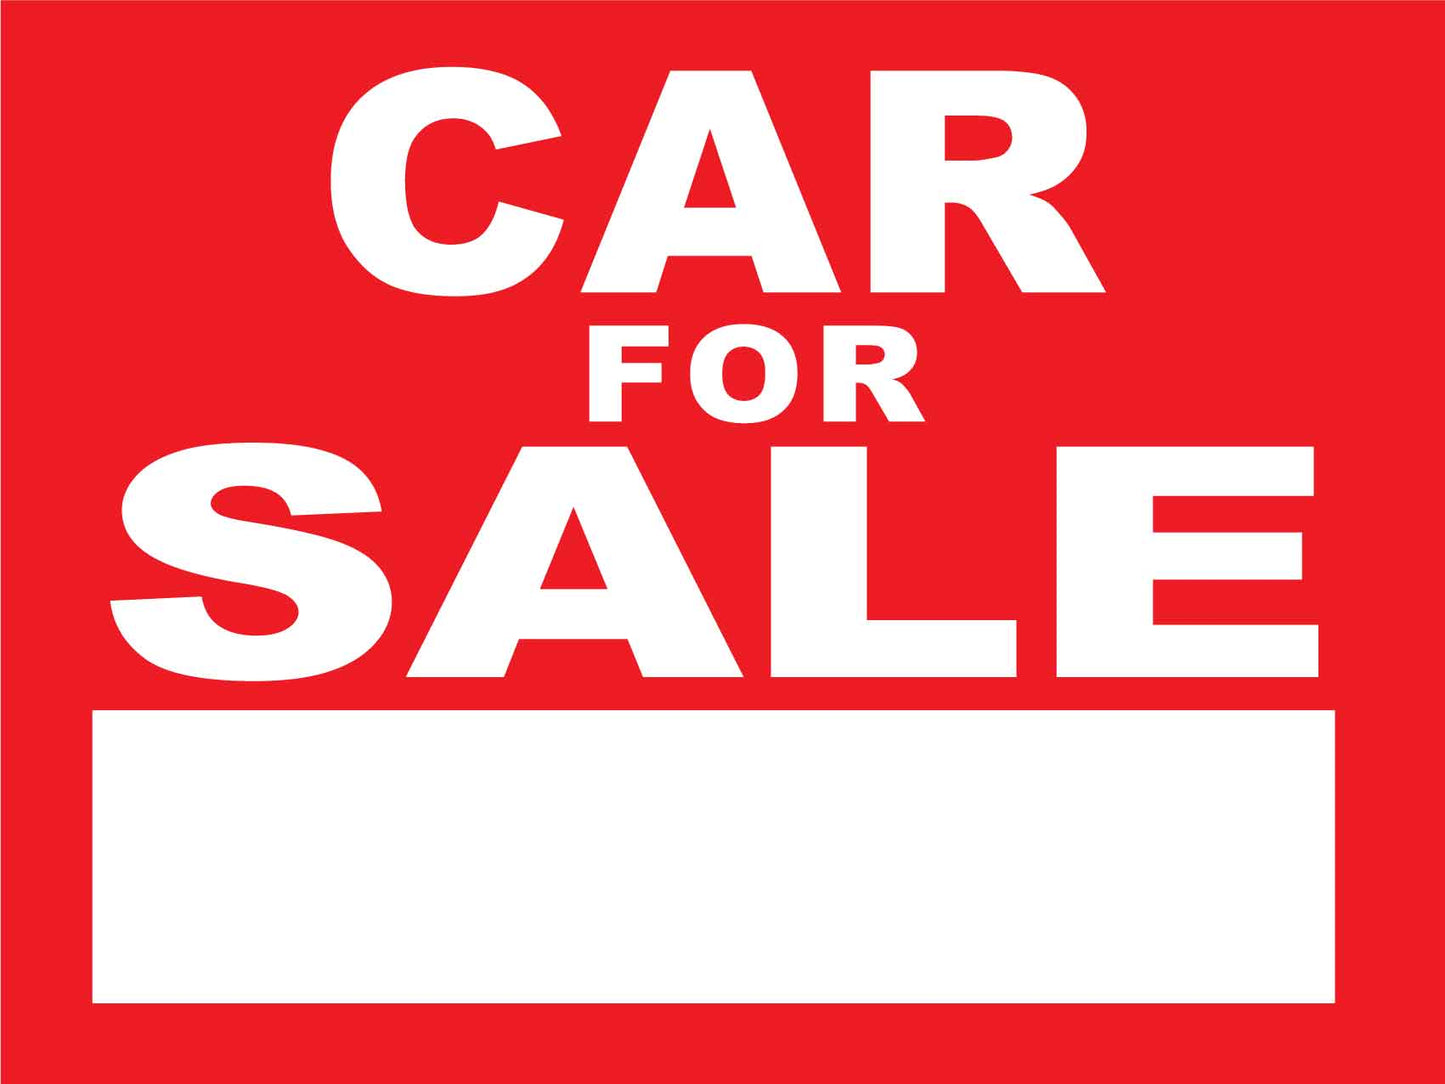 Car For Sale Sign